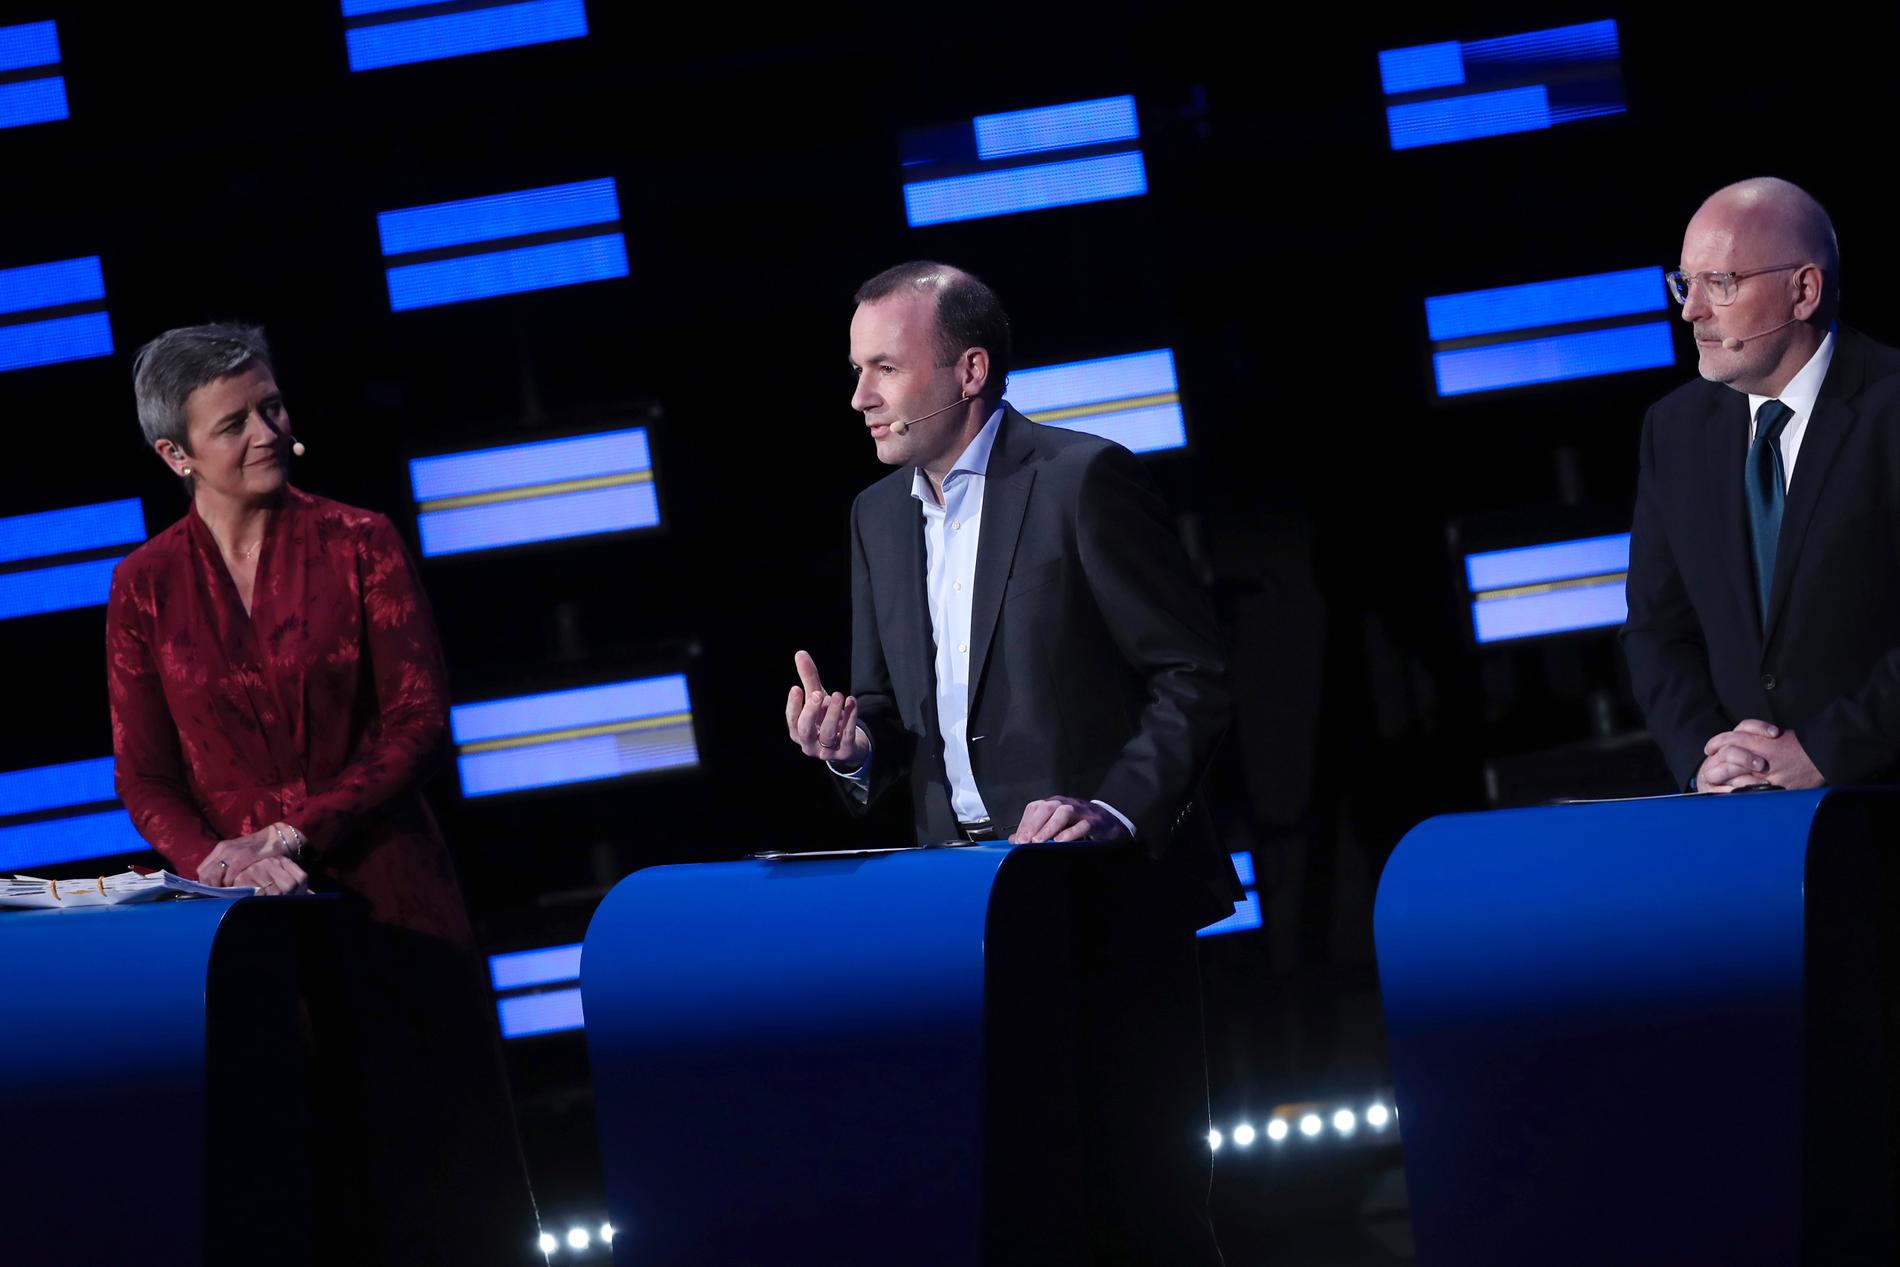 Germany's Manfred Weber of the European People's Party, center, Denmark's Margrethe Vestager of the ALDE party, left, and Netherland's Frans Timmermans of the European Socialists party Danmarks Margarethe Vestager, vänster, Tysklands Manfred Weber, mitten, Nederländernas Frans Timmermans, höger. 